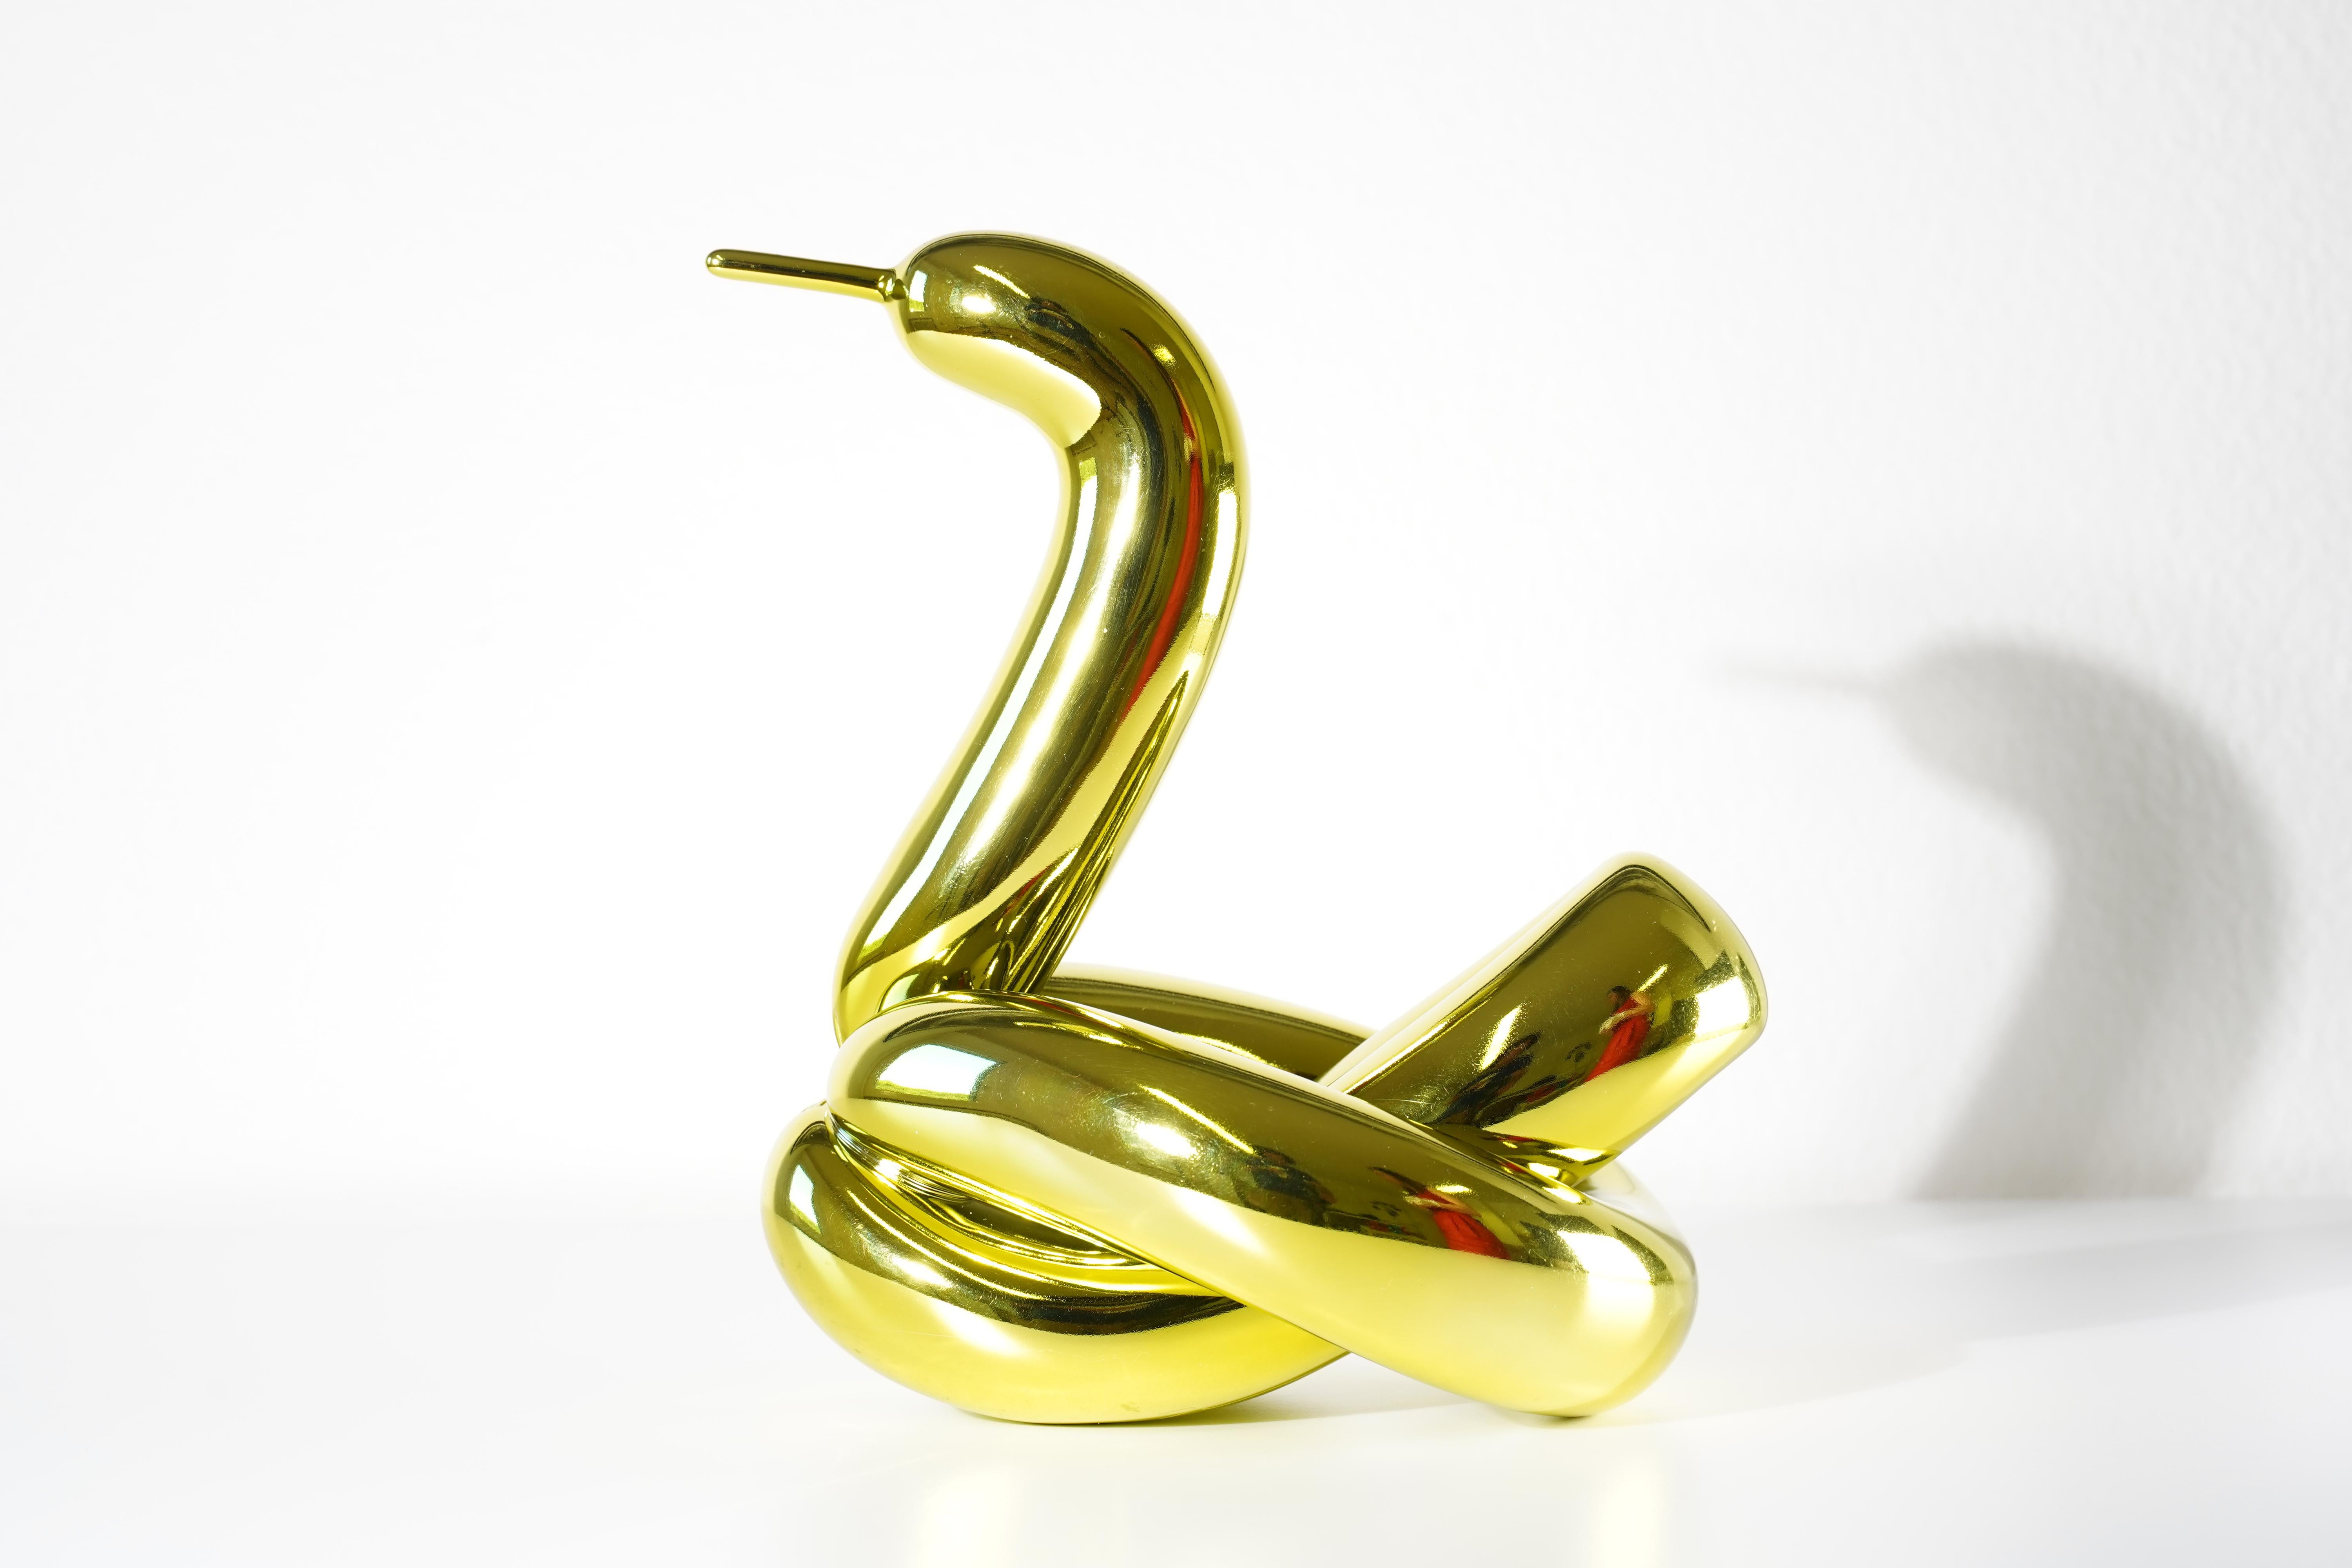 Balloon Swan (Yellow) - Jeff Koons, 21st Century, Contemporary, Porcelain, Sculpture, Decor, Limited Edition

Limoges porcelain with chromatic metalized coating
Edition of 999
Signed and numbered
In mint condition, as acquired from the